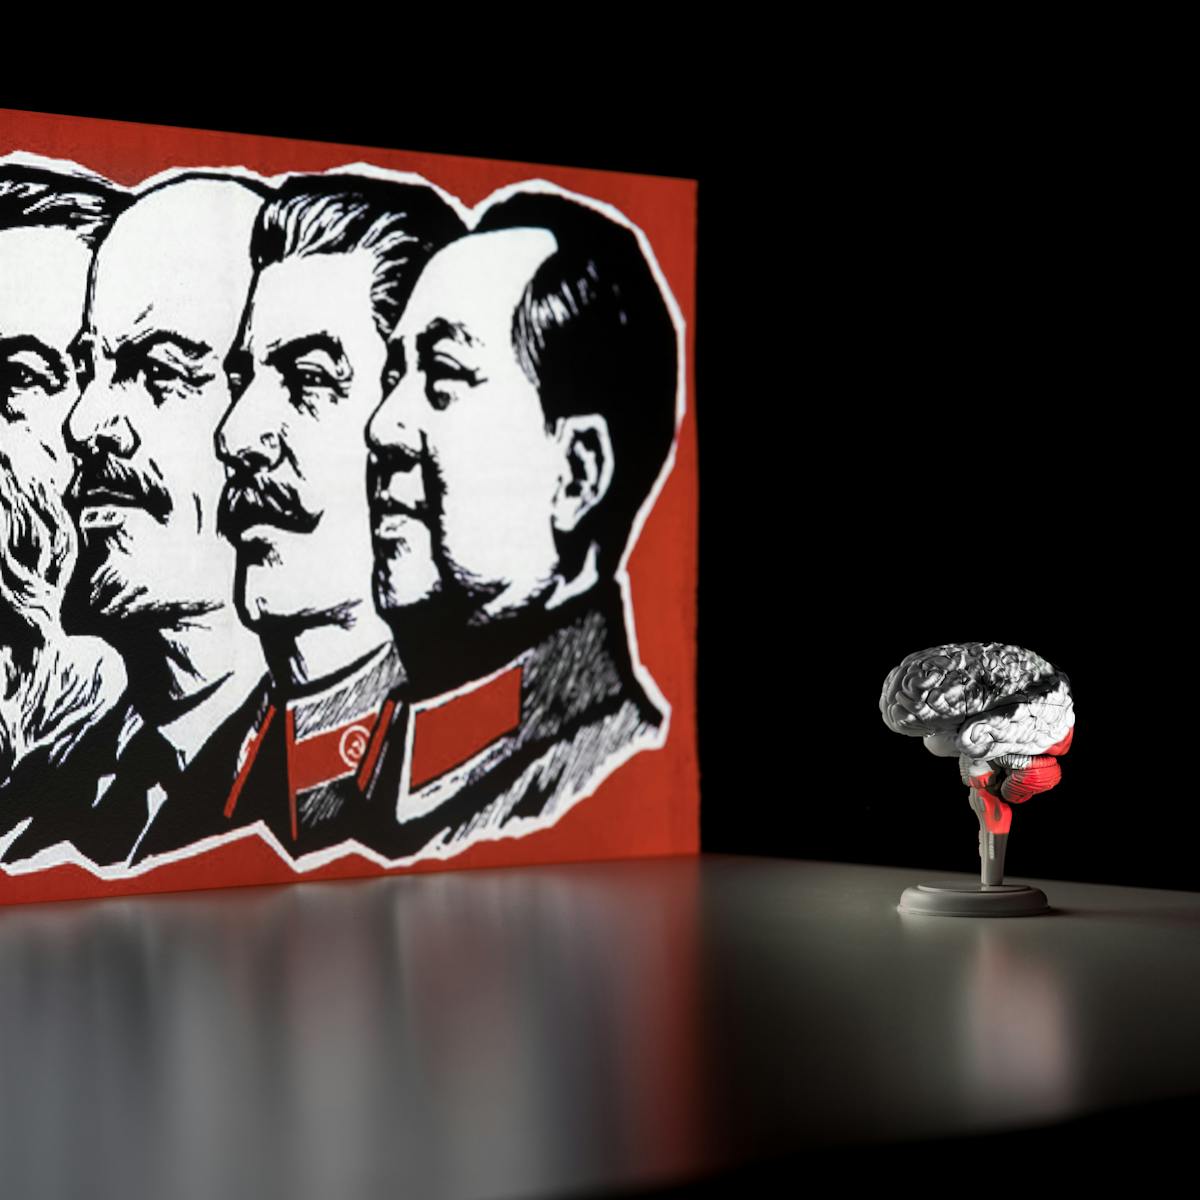 Photograph of a dark corner of a room. On the wall is a projected illustration of the heads of Marx, Engels, Lenin, Stalin and Mao Zedong, all in profile. The illustrated heads are monotone set within a bright red border. In front of the projected image is a flat tabletop which shows a slight reflection of the illustration. Standing on the table to the right is a small model of a brain, resting on a stand. Part of the projected image washes across the surface of the brain, covering it in the image and its colours.